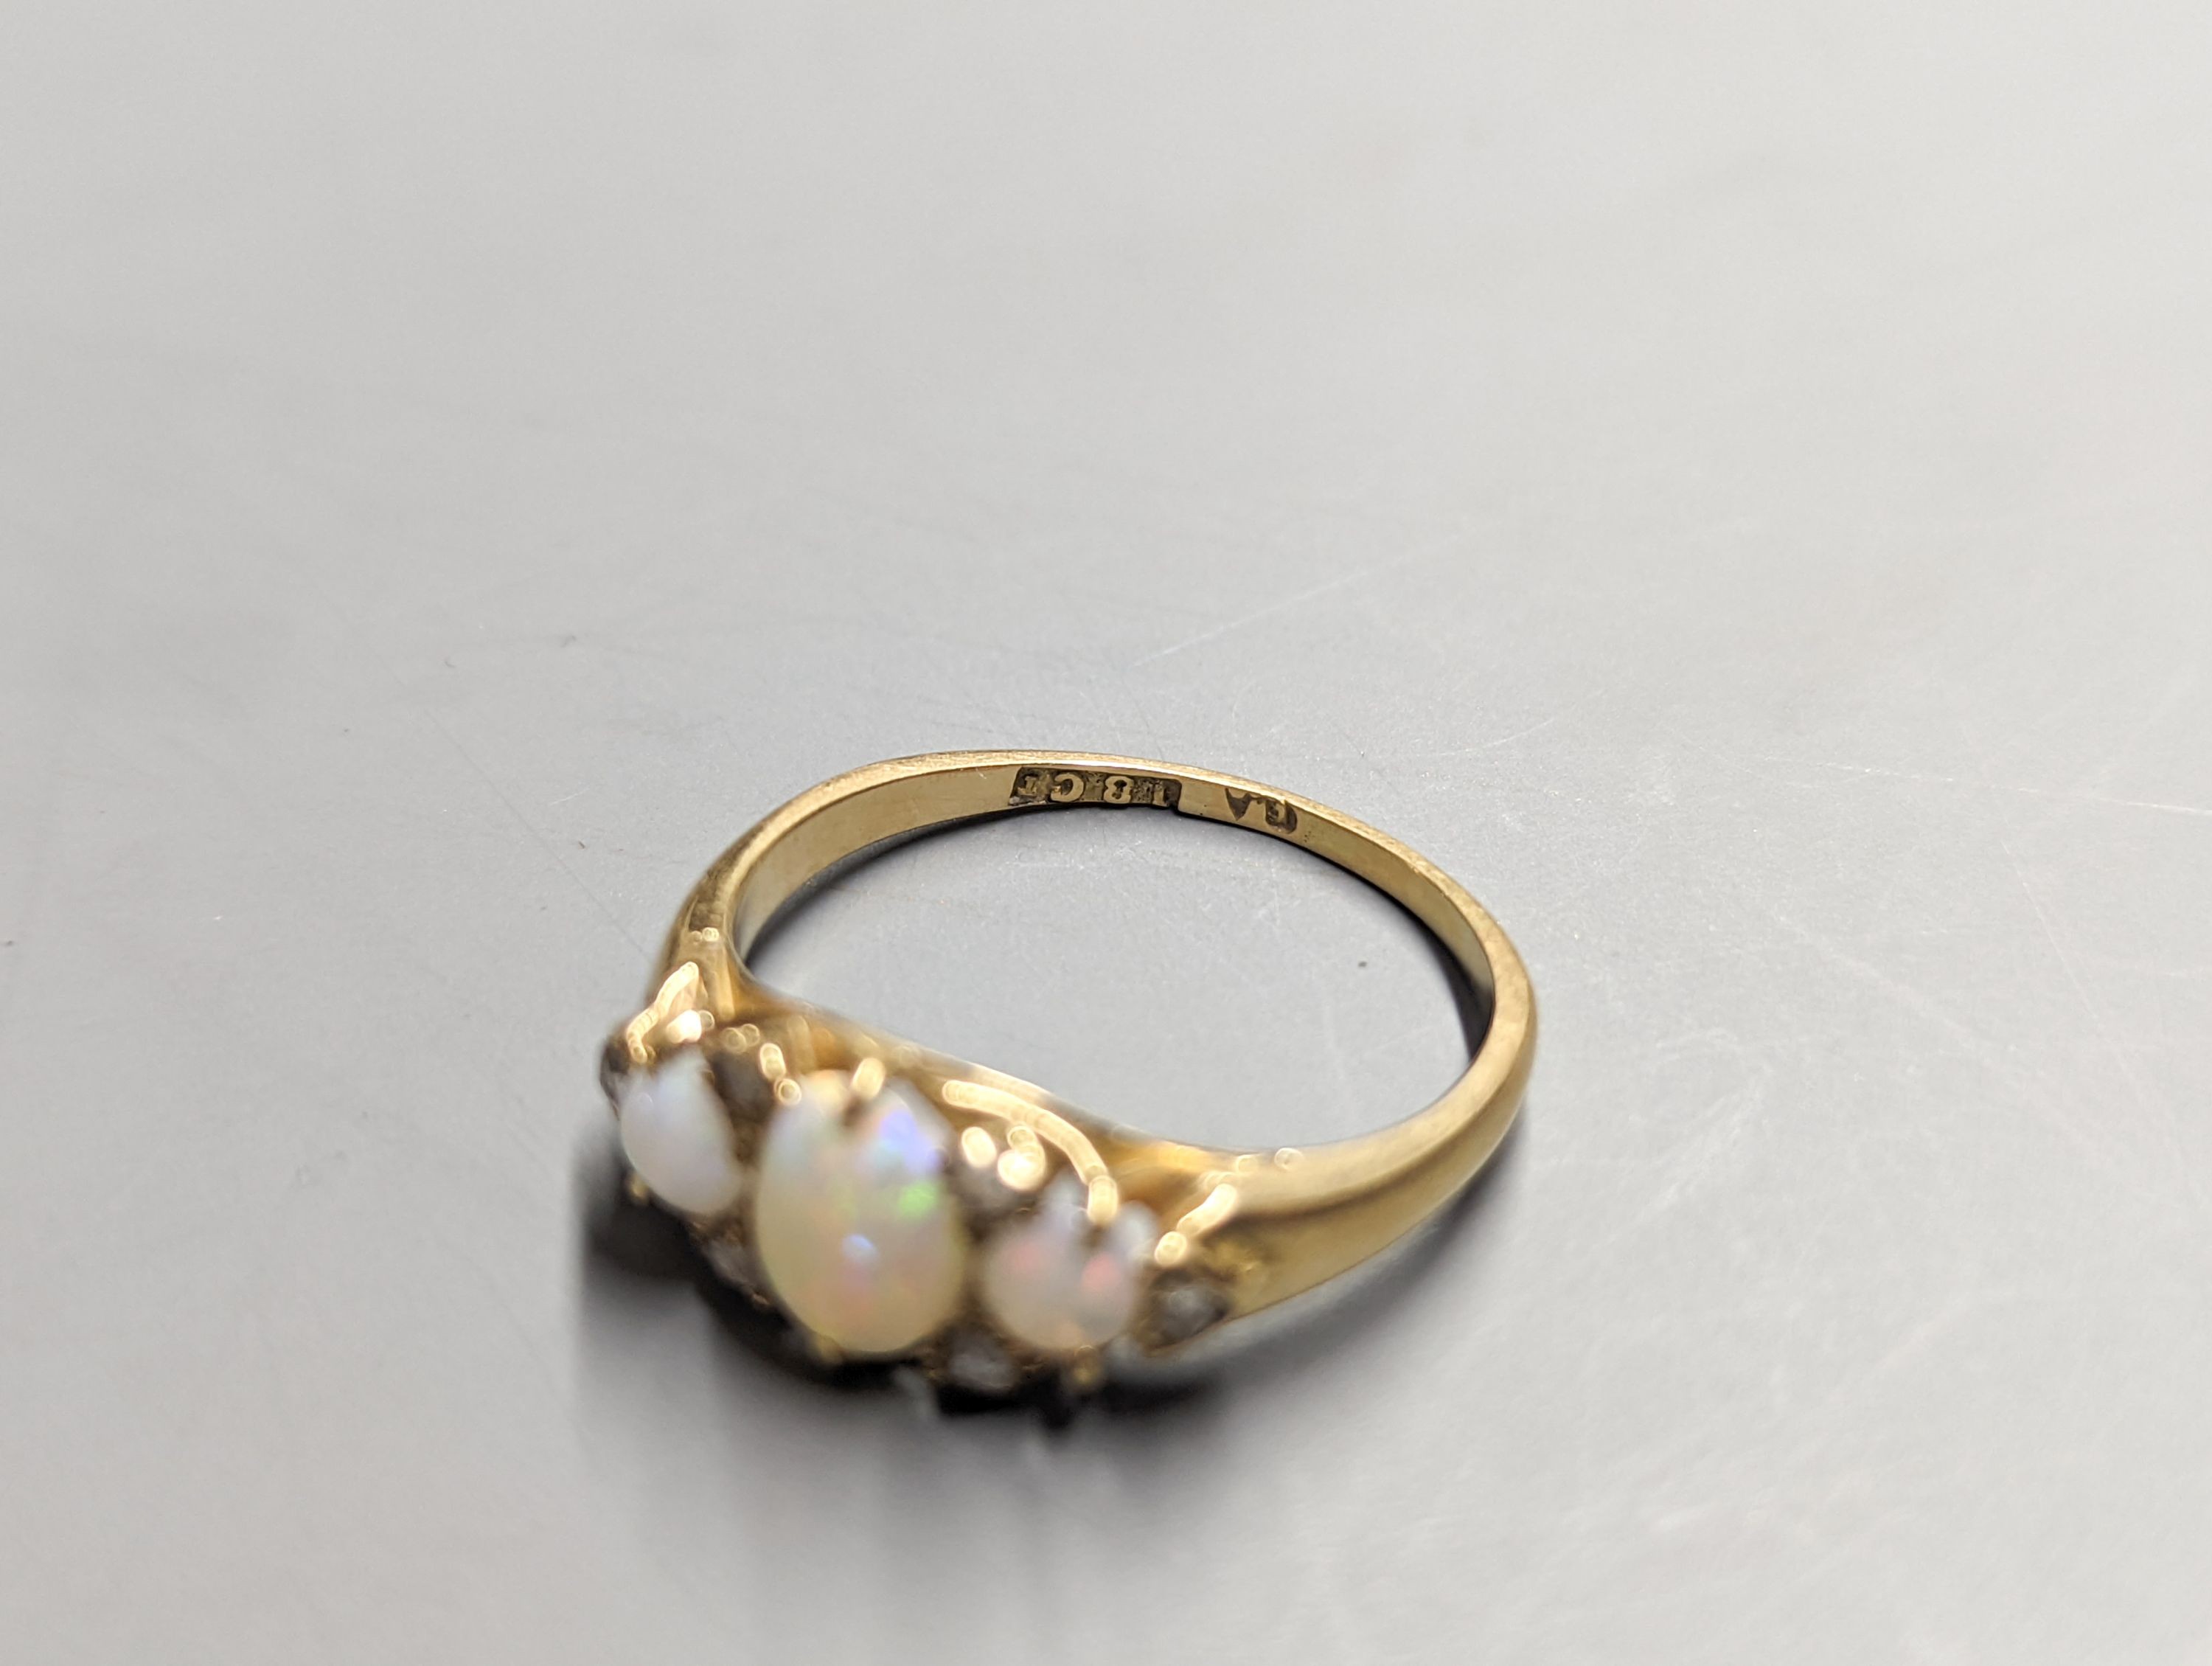 An early 20th century 18ct and three stone white opal set ring, with diamond chip spacers, size Q/R, gross 3.7 grams.